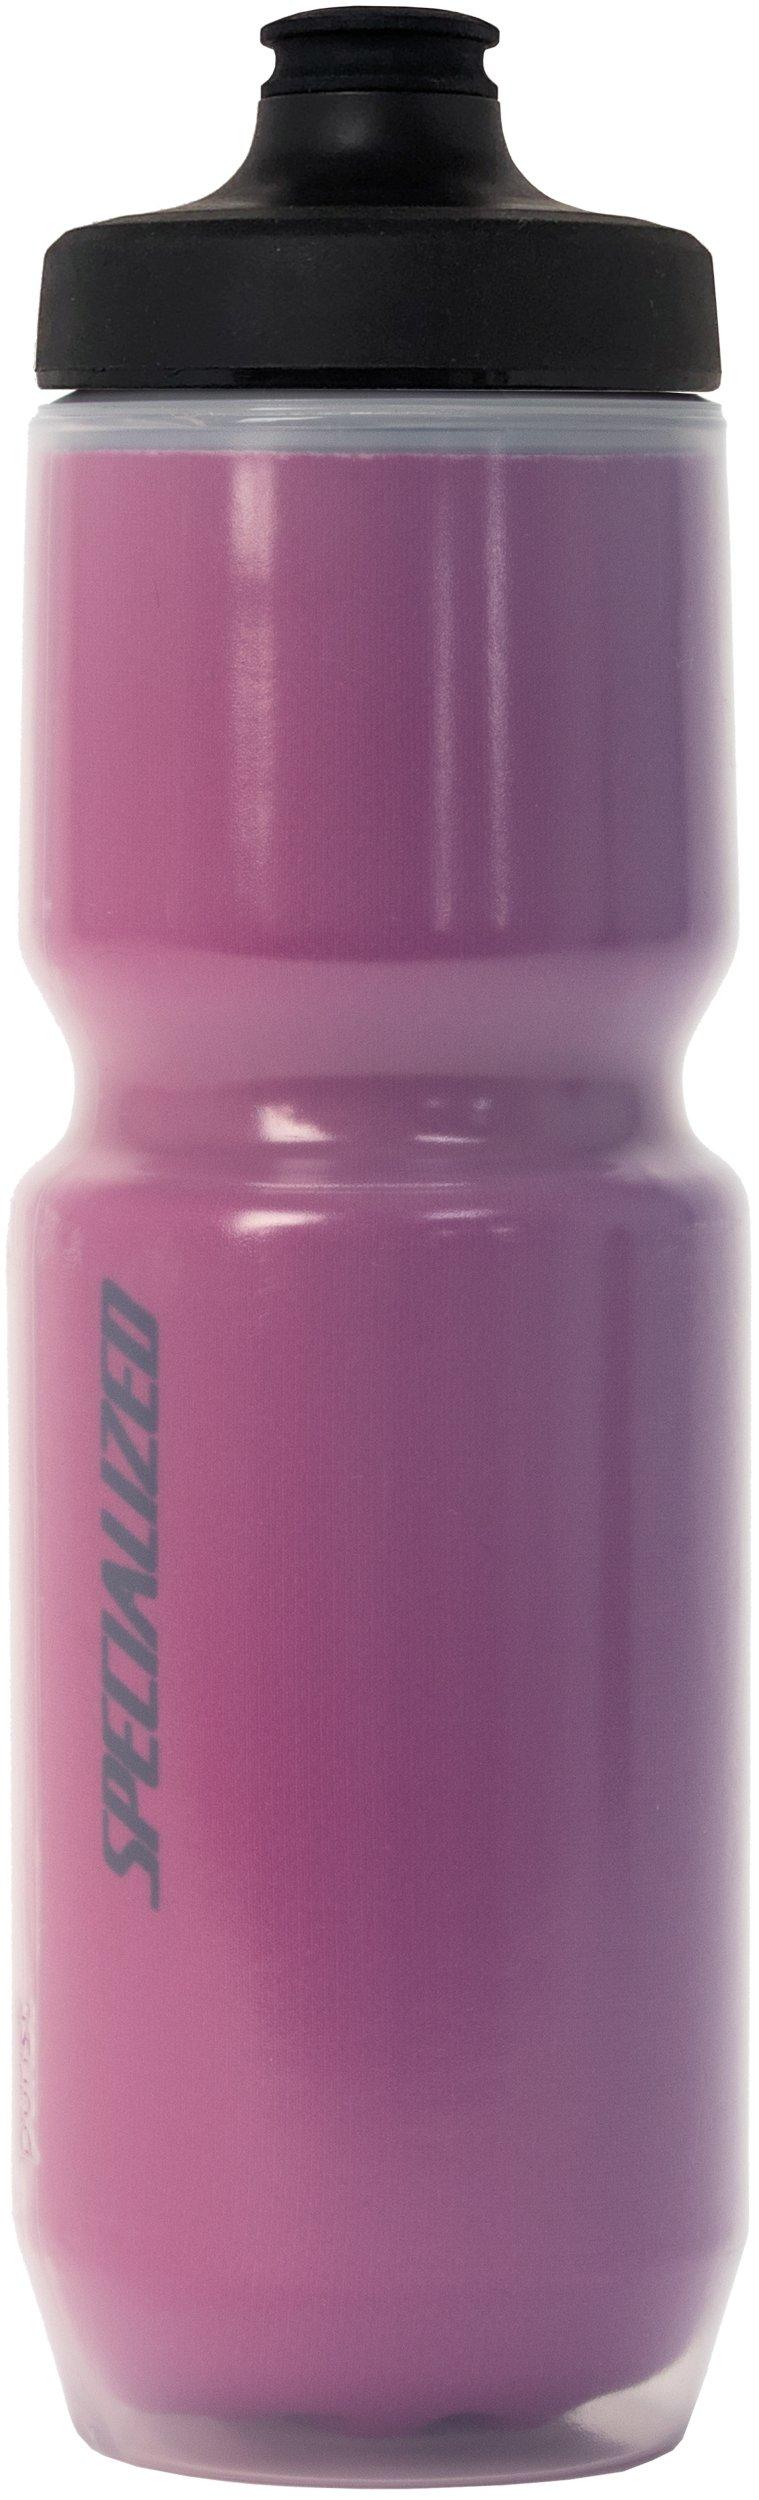 BrüMate Rehydration Bottle 25oz. : NEON PINK – Peppered Skye Boutique